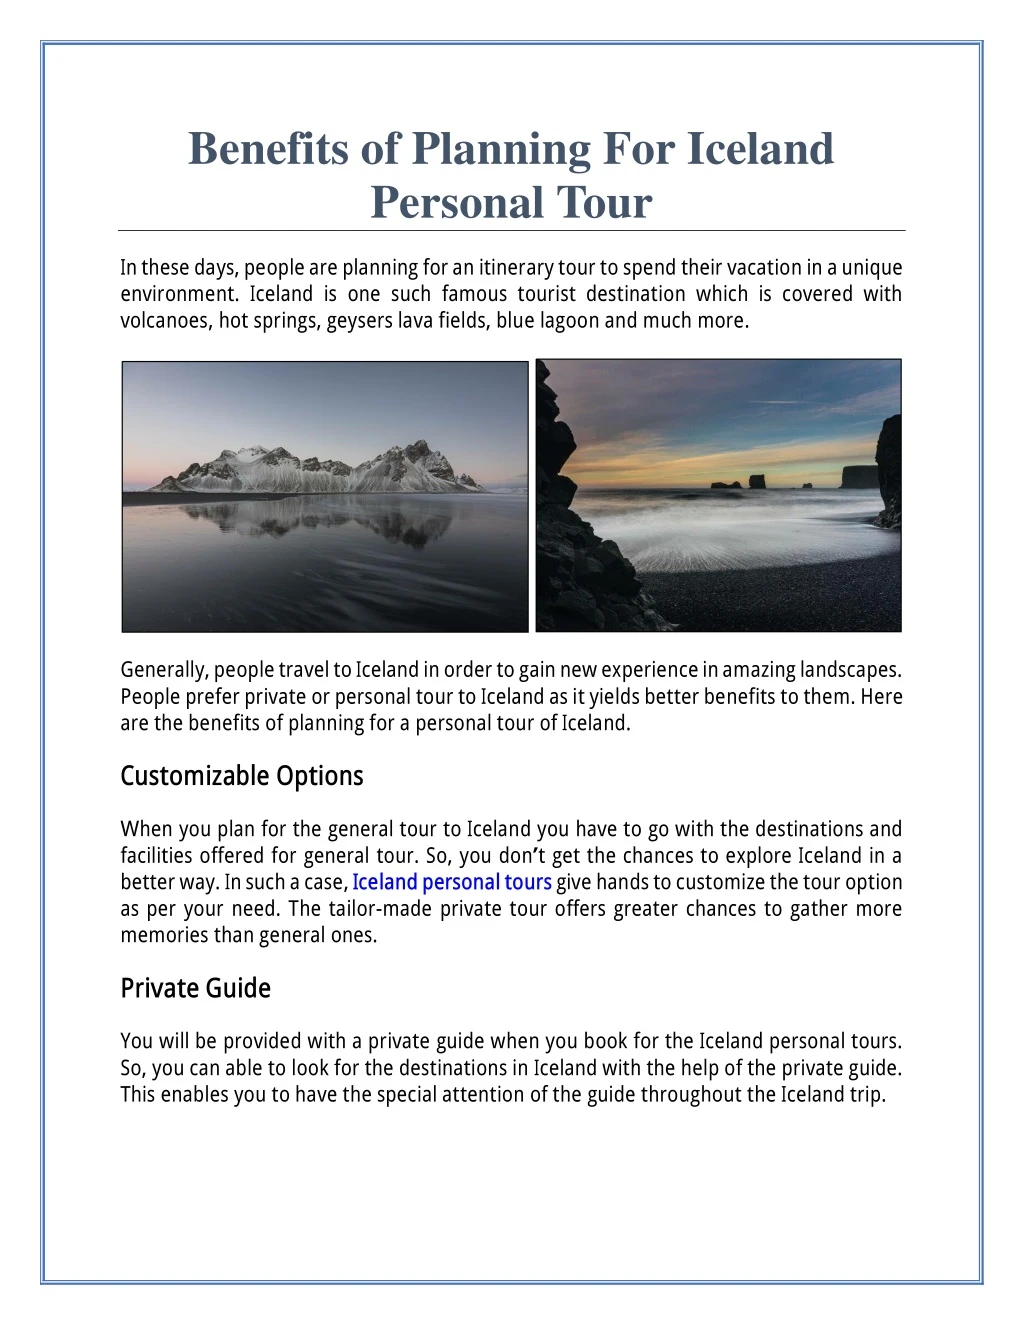 benefits of planning for iceland personal tour